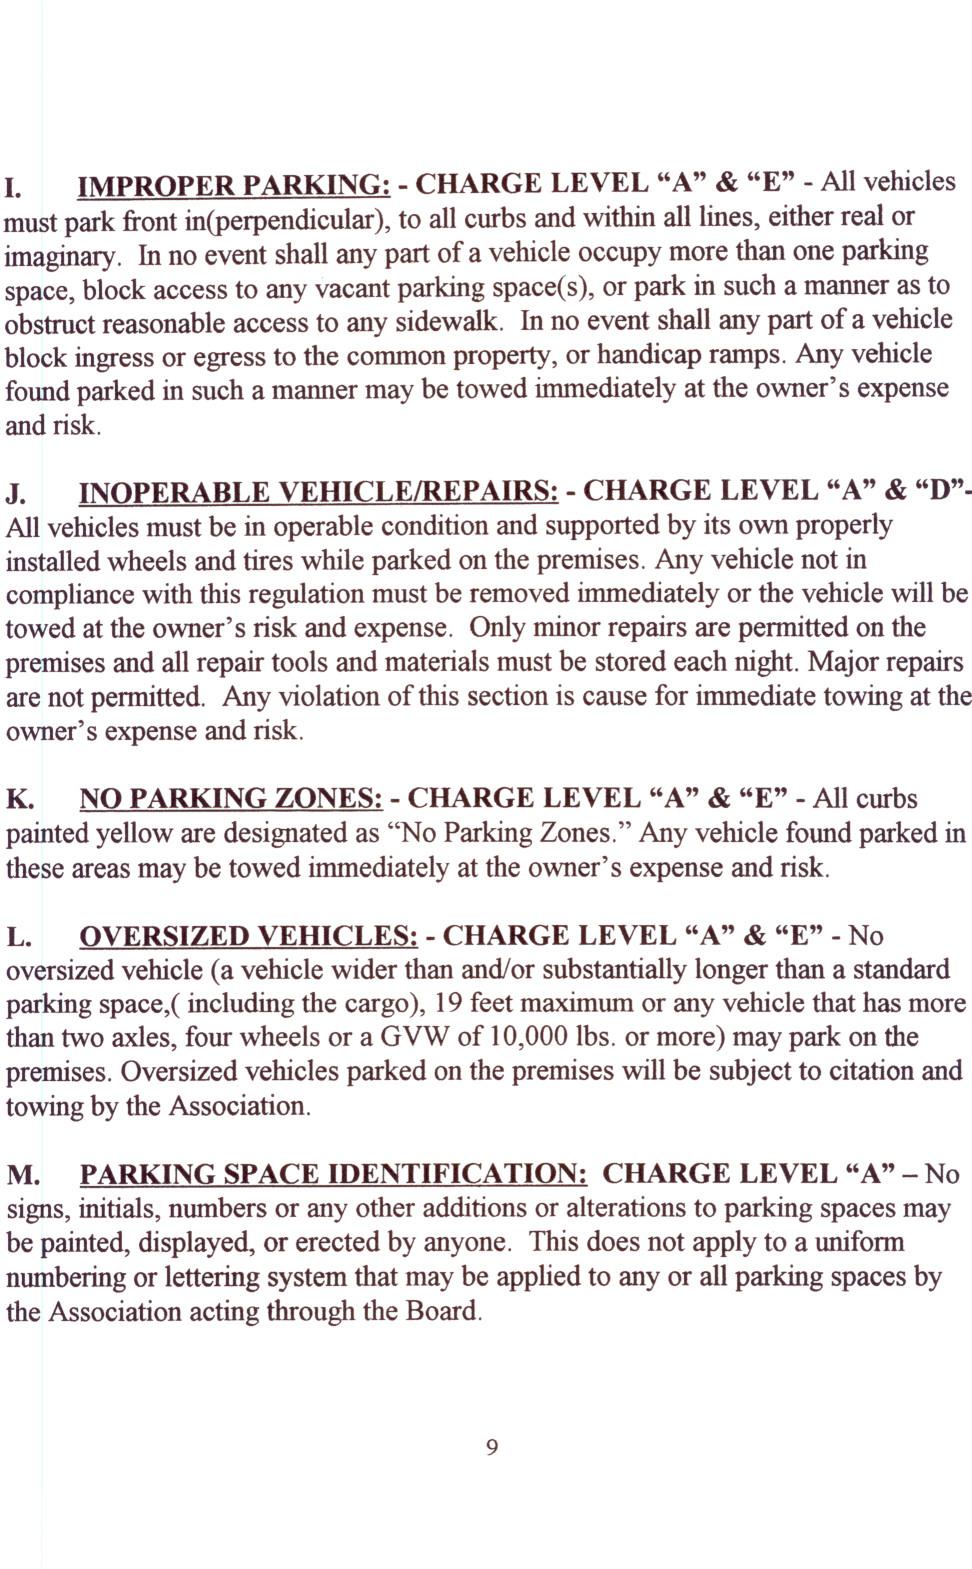 I. IMPROPER PARKING: - CHARGE LEVEL "A" & "E" - All vehicles must park front in(perpendicular), to all curbs and within all lines, either real or imaginary.